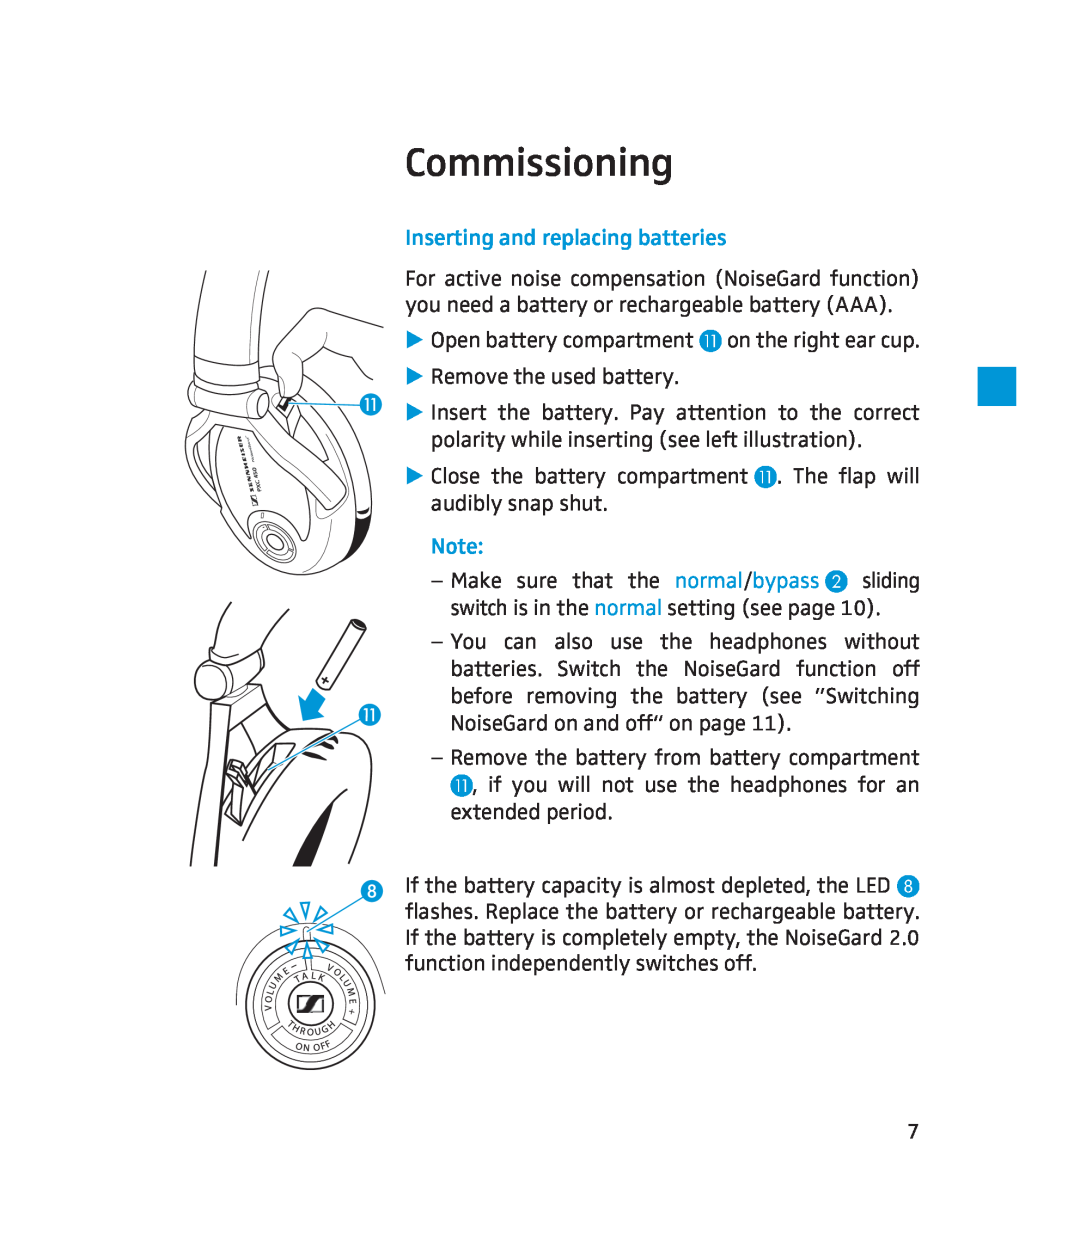 Sennheiser 500643 instruction manual Commissioning, Inserting and replacing batteries, Make sure that the normal/bypass 